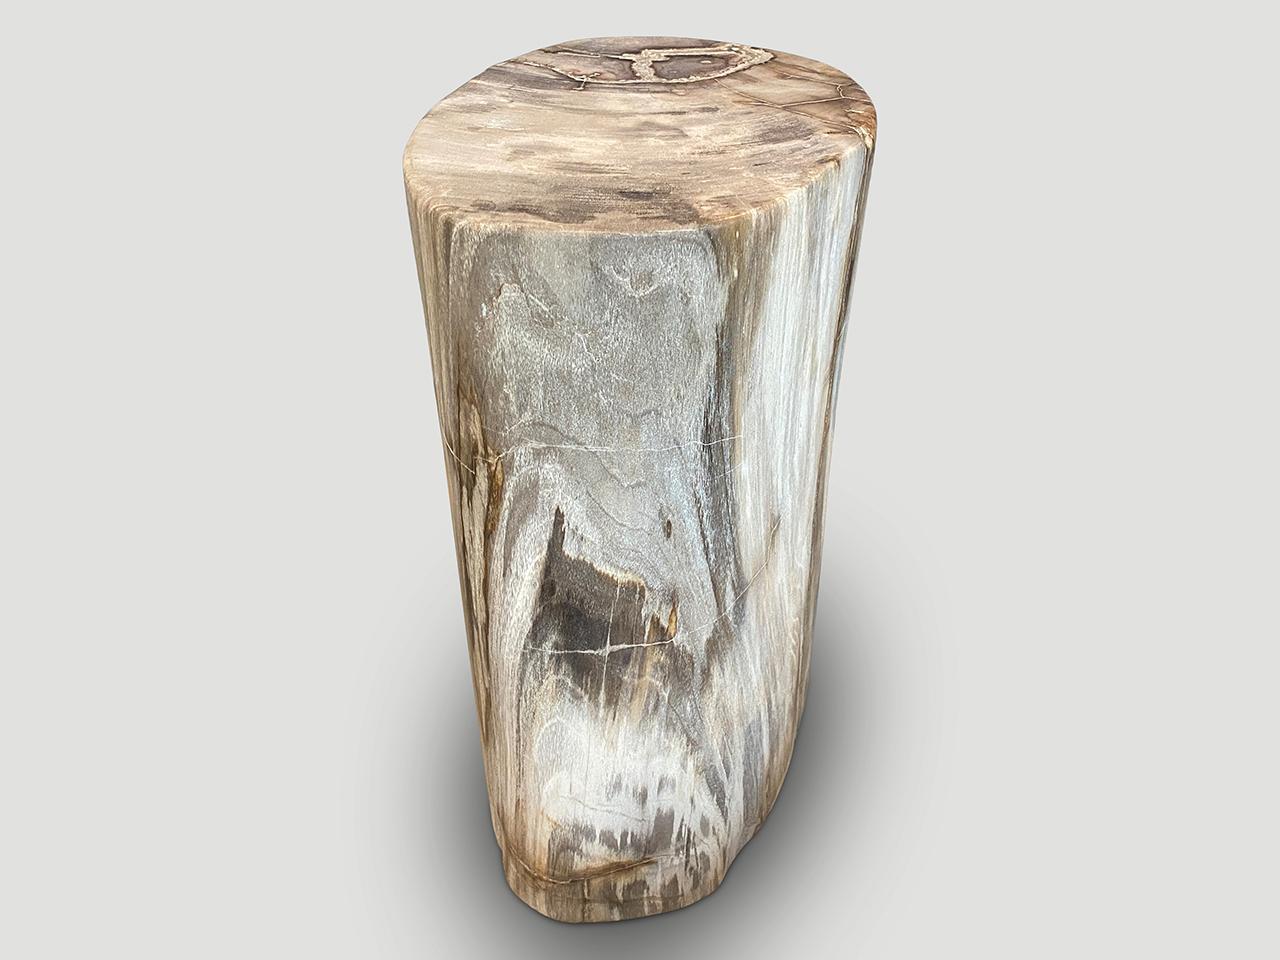 Andrianna Shamaris Exquisite High Quality Petrified Wood Side Table or Pedestal 3